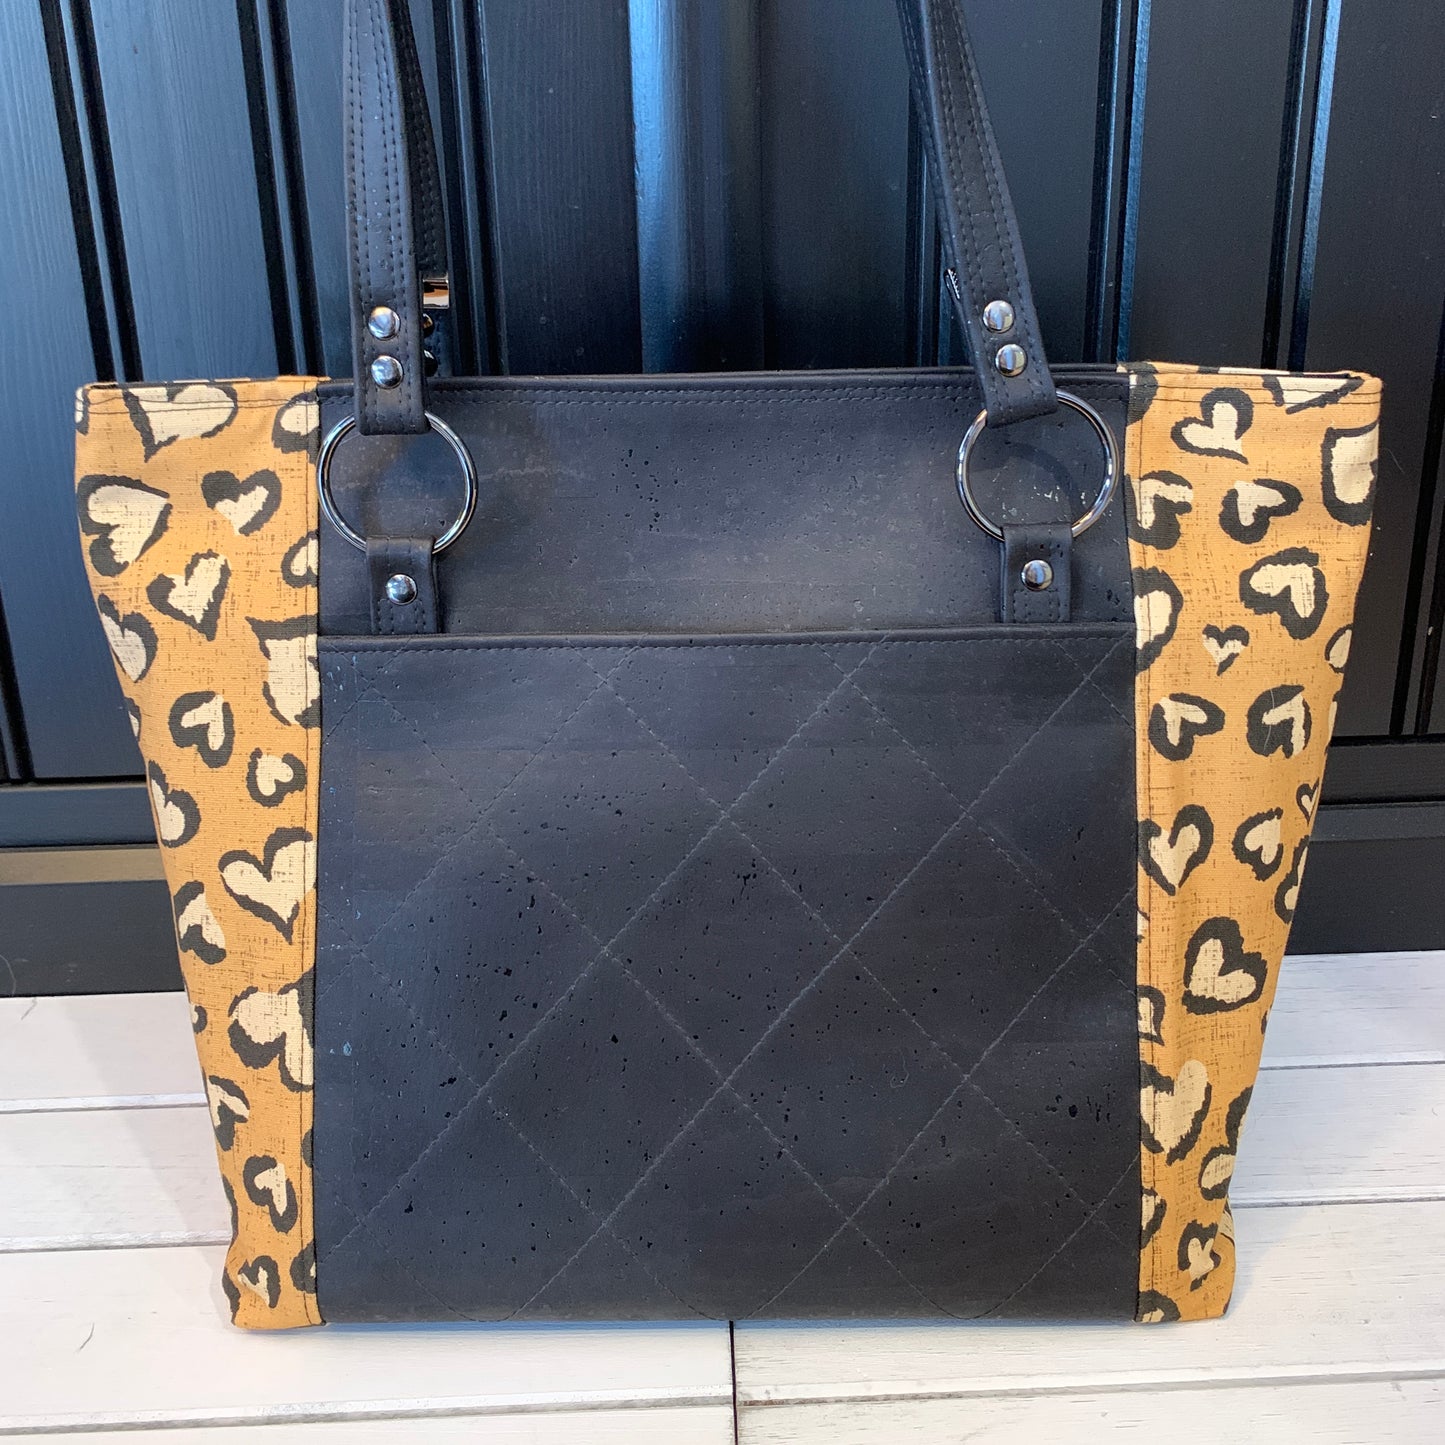 Muerqo Tote - Leopard Heart Canvas and Black Cork